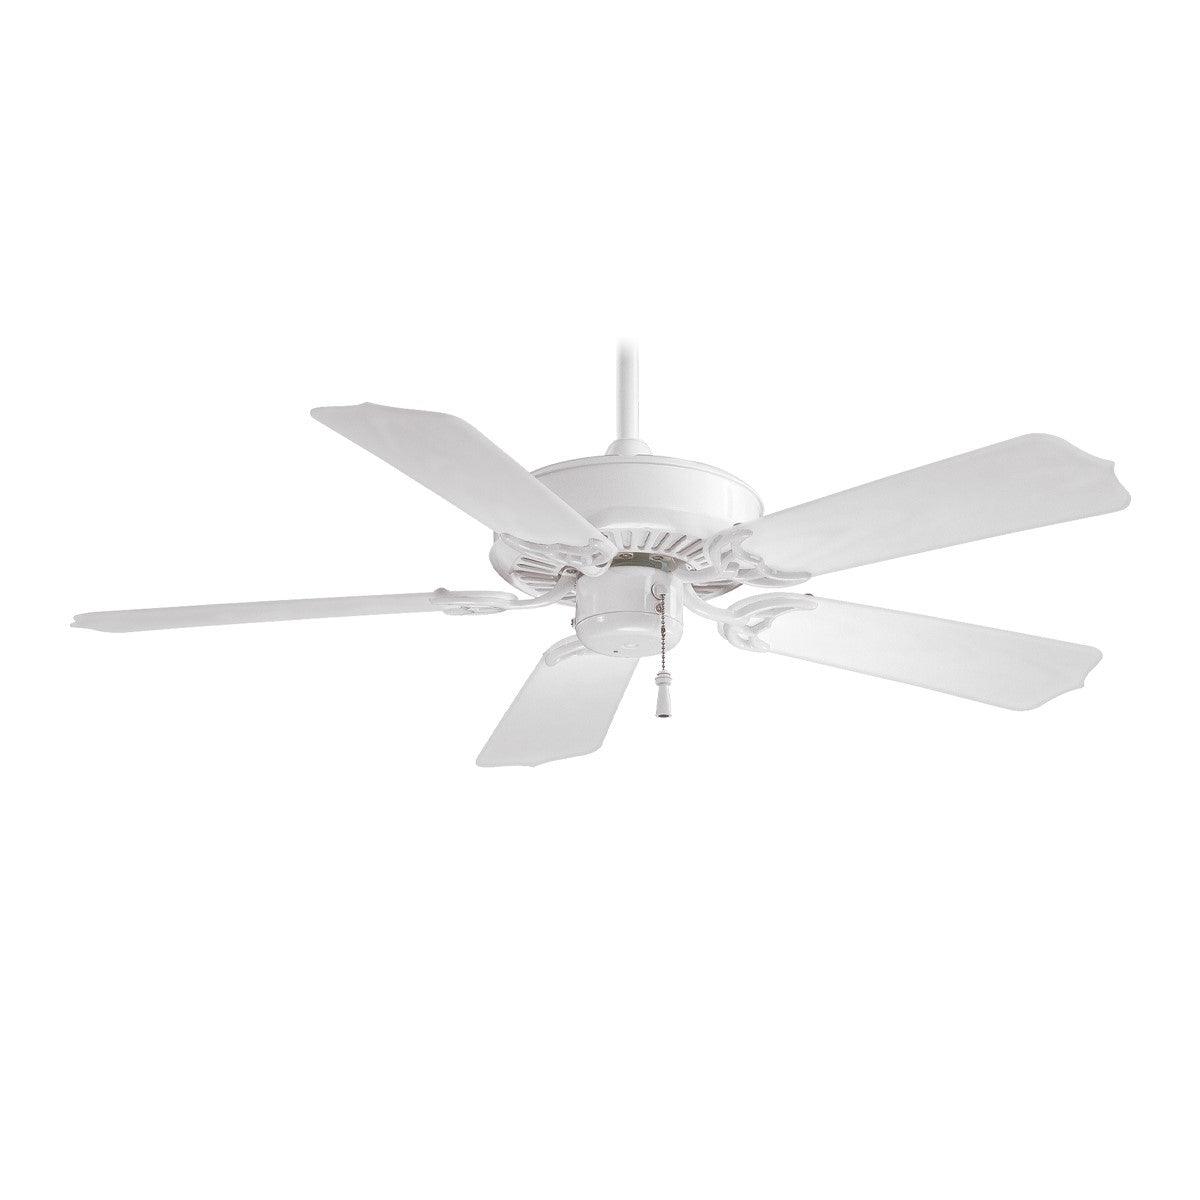 Sundance 42 Inch Outdoor Ceiling Fan With Pull Chain